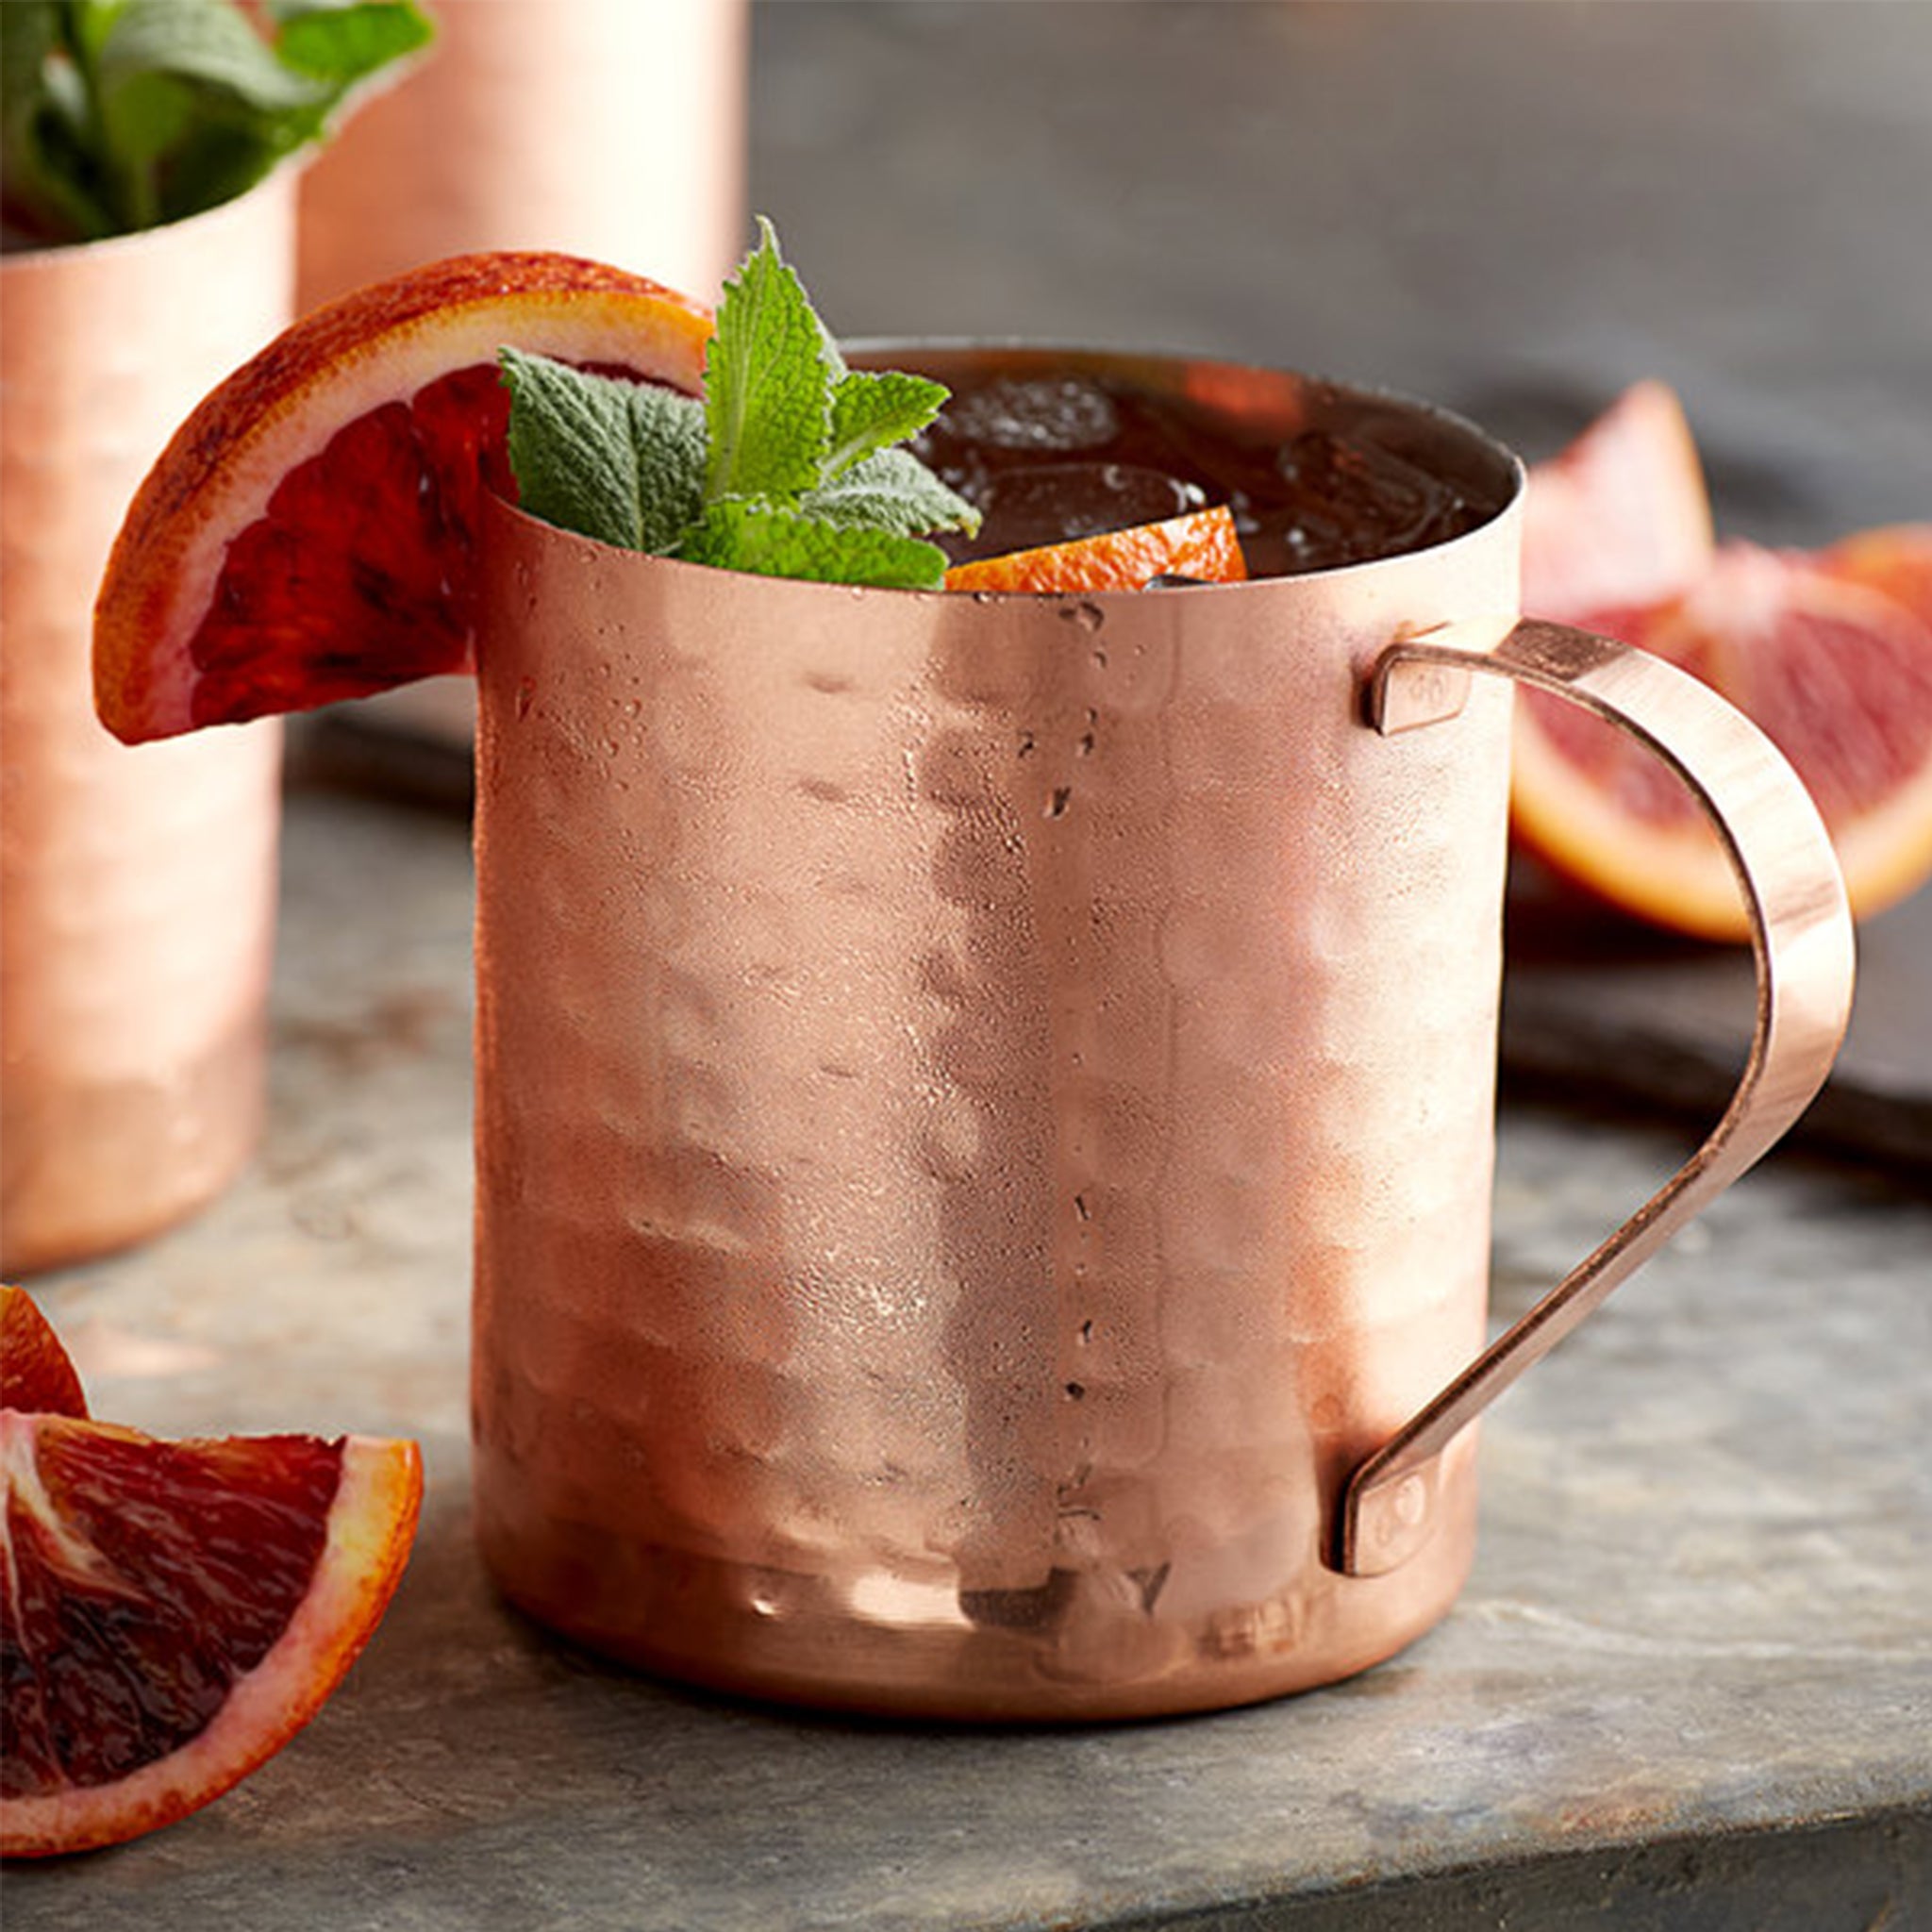 Bar Lux 16 oz Copper-Plated Stainless Steel Moscow Mule Mug - 3